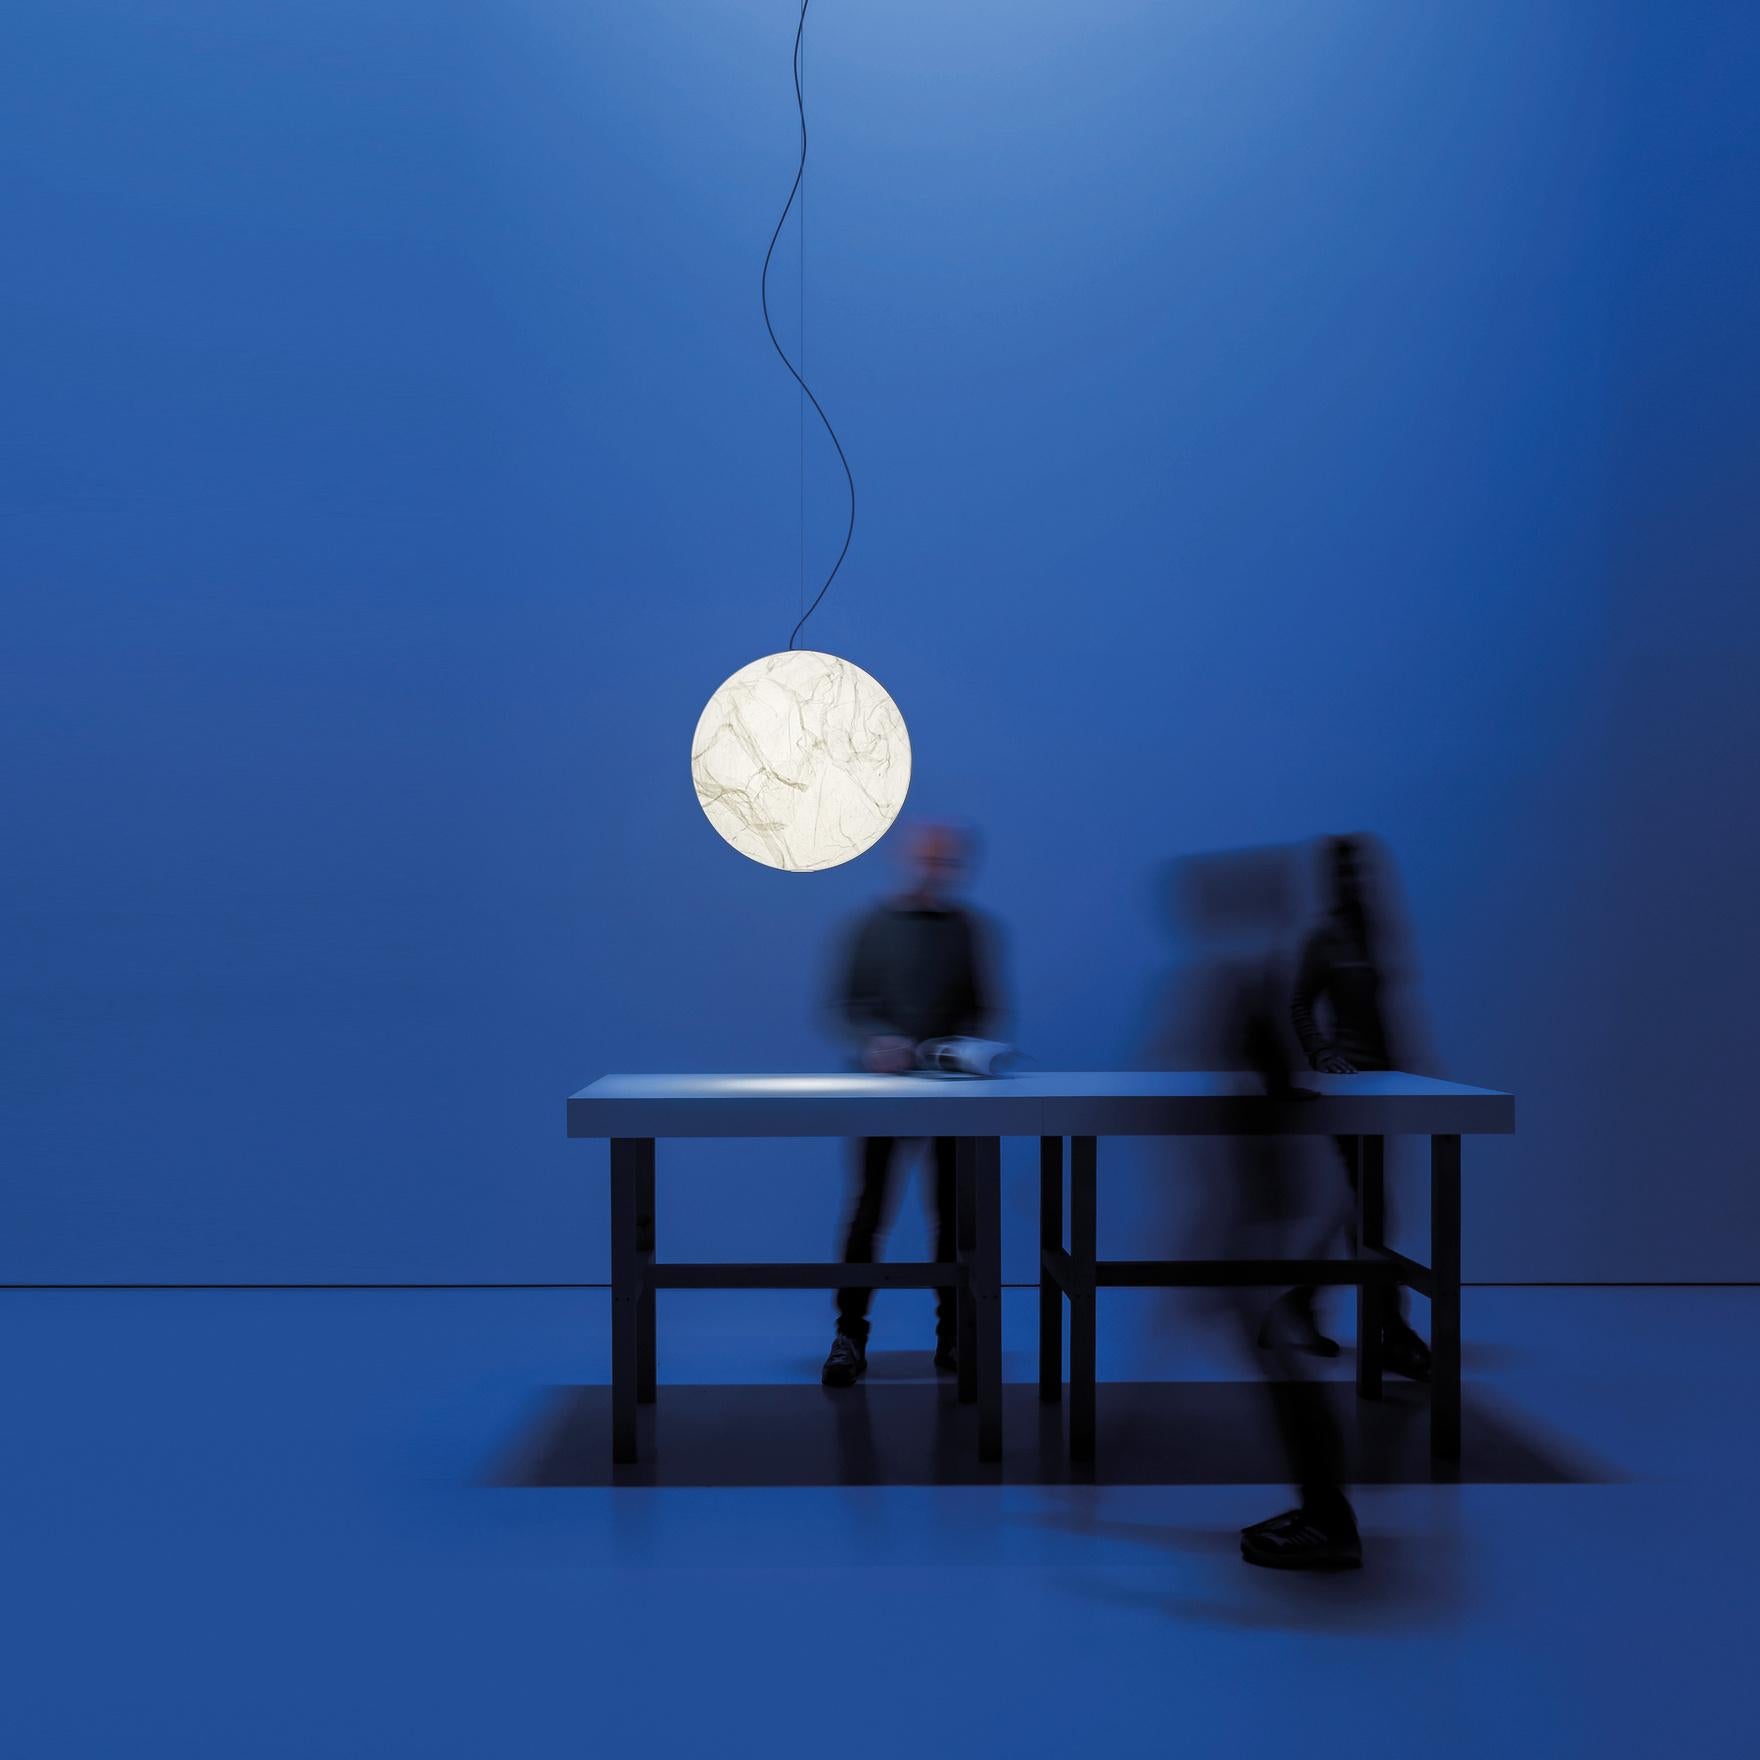 Moon was created from the dream of bringing the moon inside your own home.
The hand-made Japanese paper surface makes every lamp unique. 
Table and floor version available.

Available in different sizes: medium, Extra Large, Large

Diameter